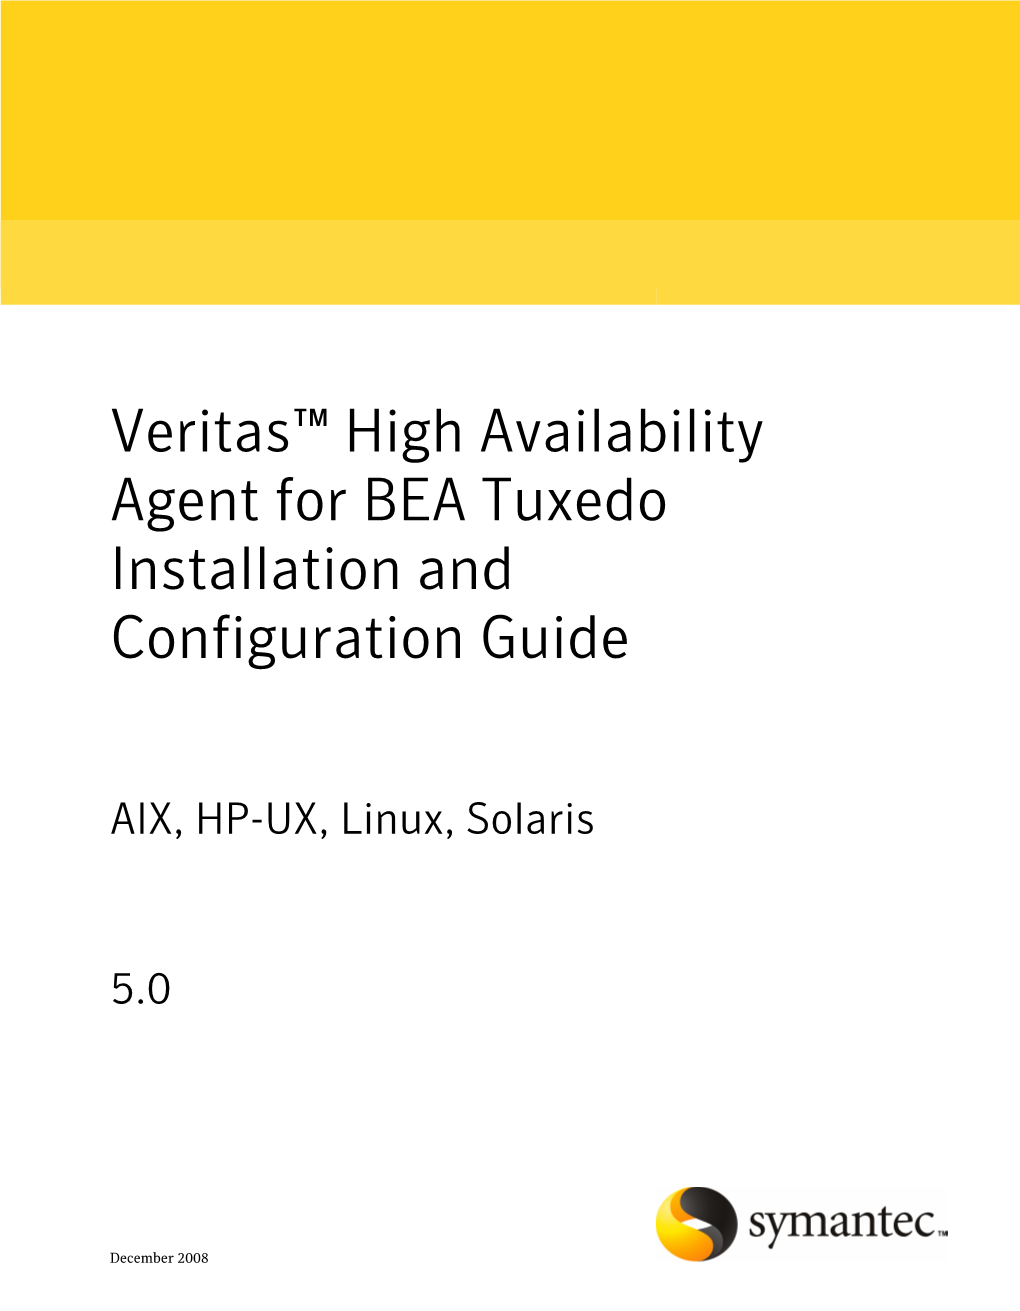 Veritas™ High Availability Agent for BEA Tuxedo Installation and Configuration Guide